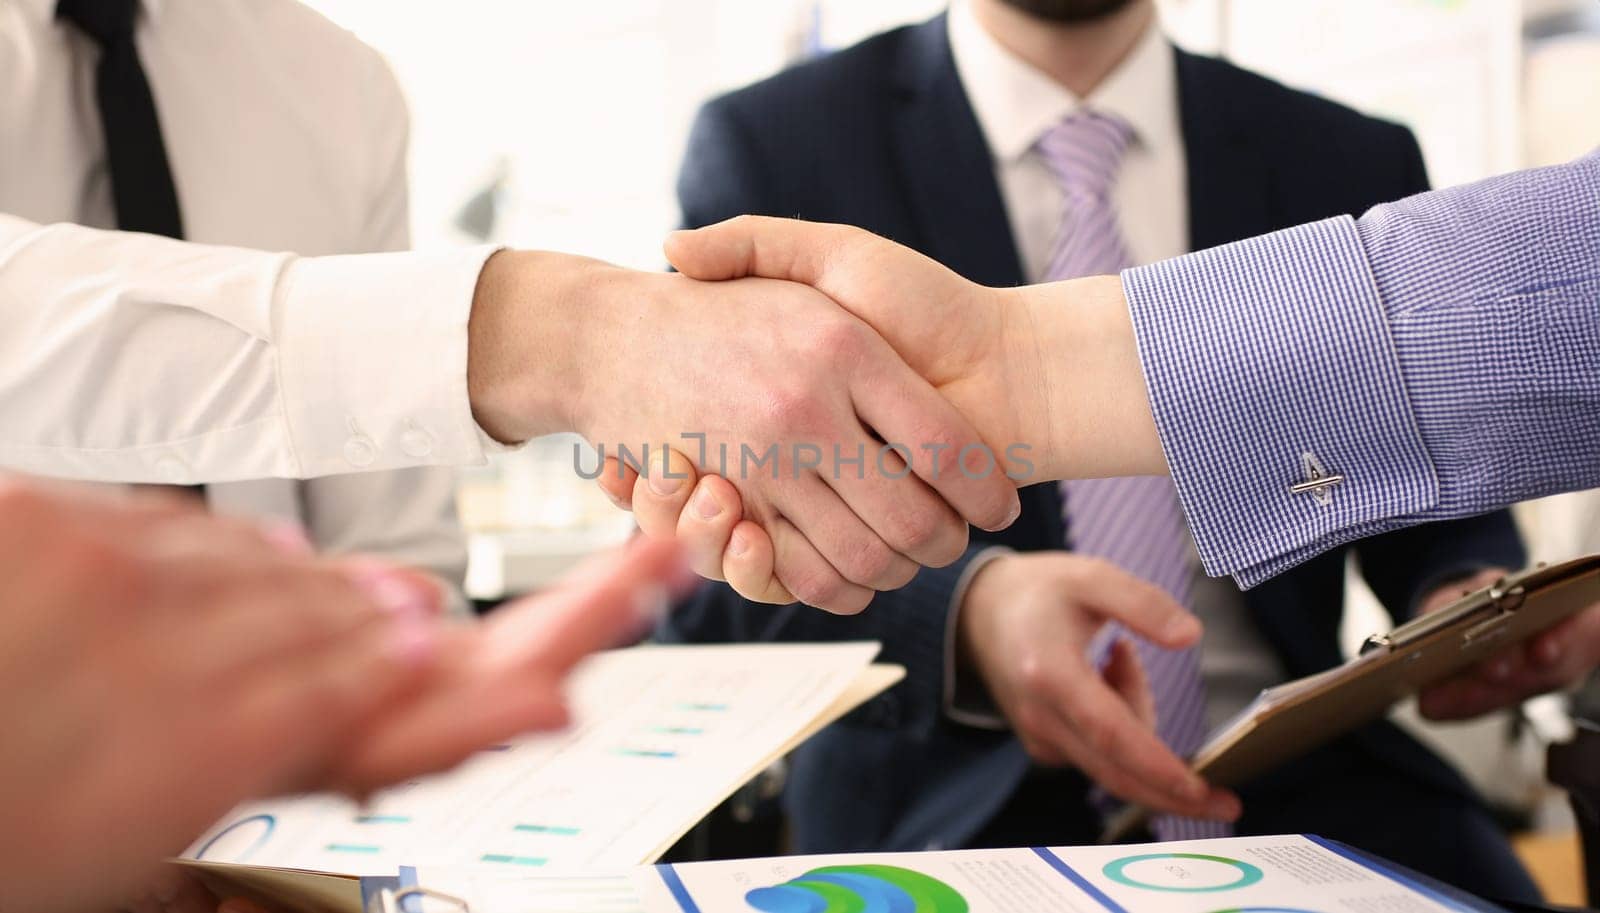 Group of businessmen shaking hands after productive meeting closeup